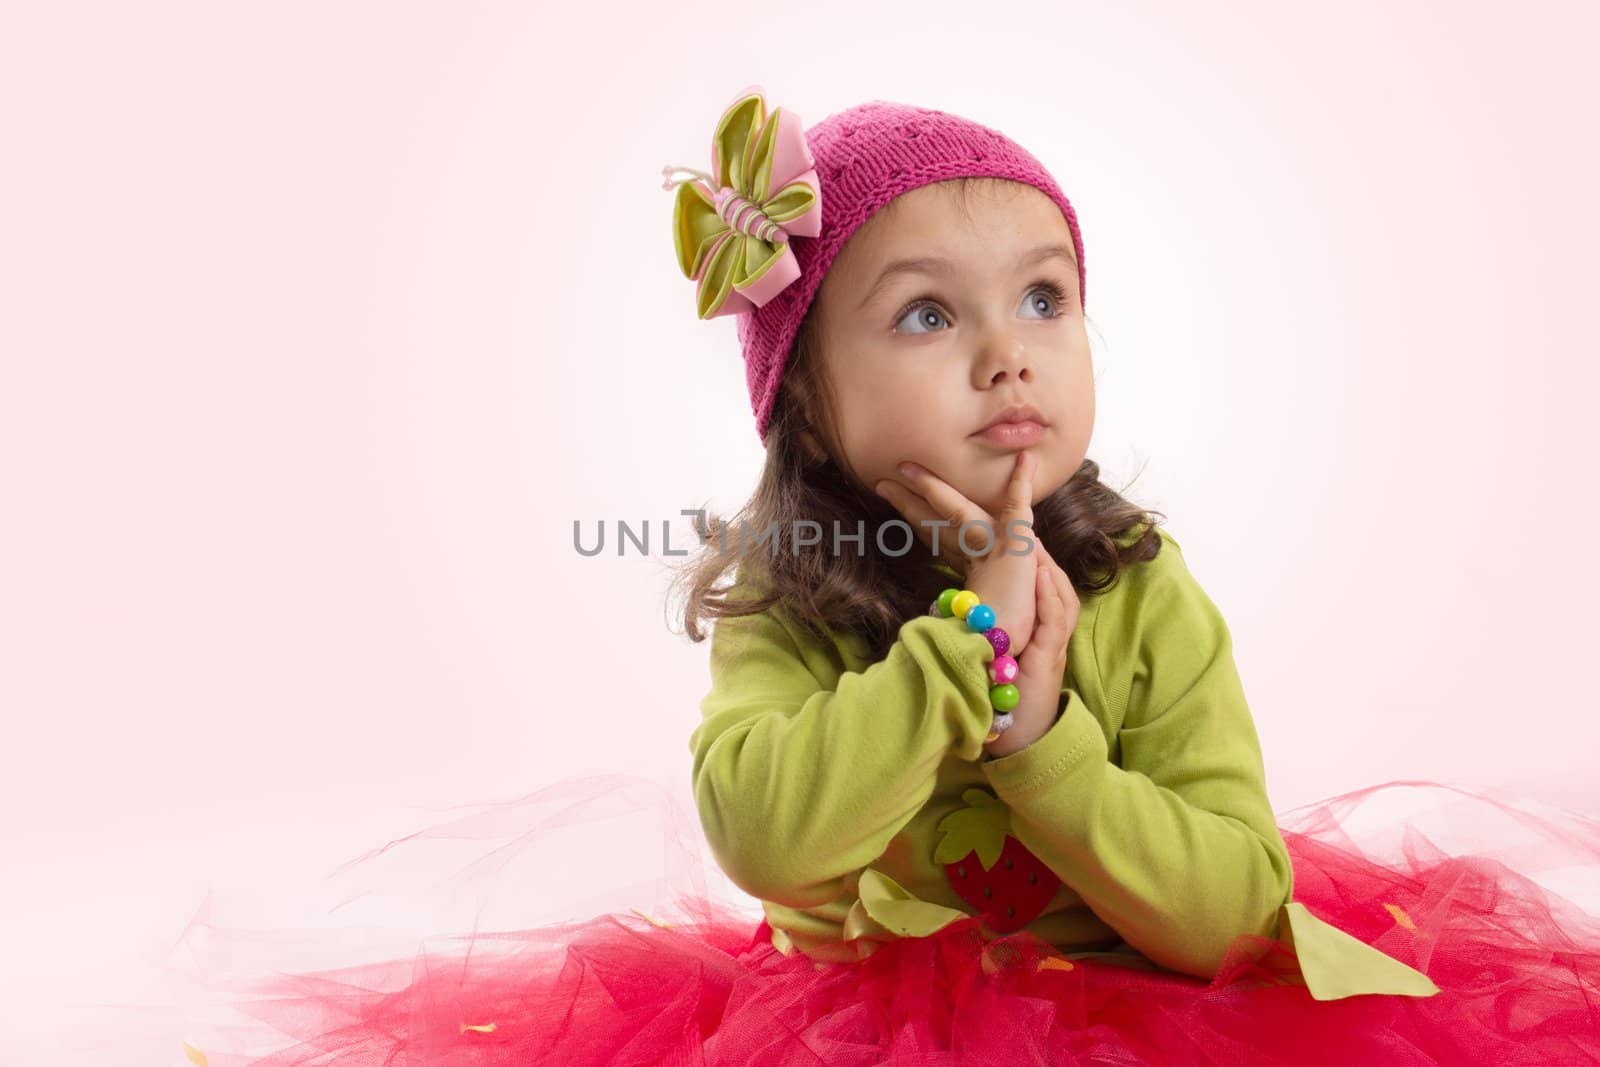 Adorable girl in tutu and hat with butterfly over pink